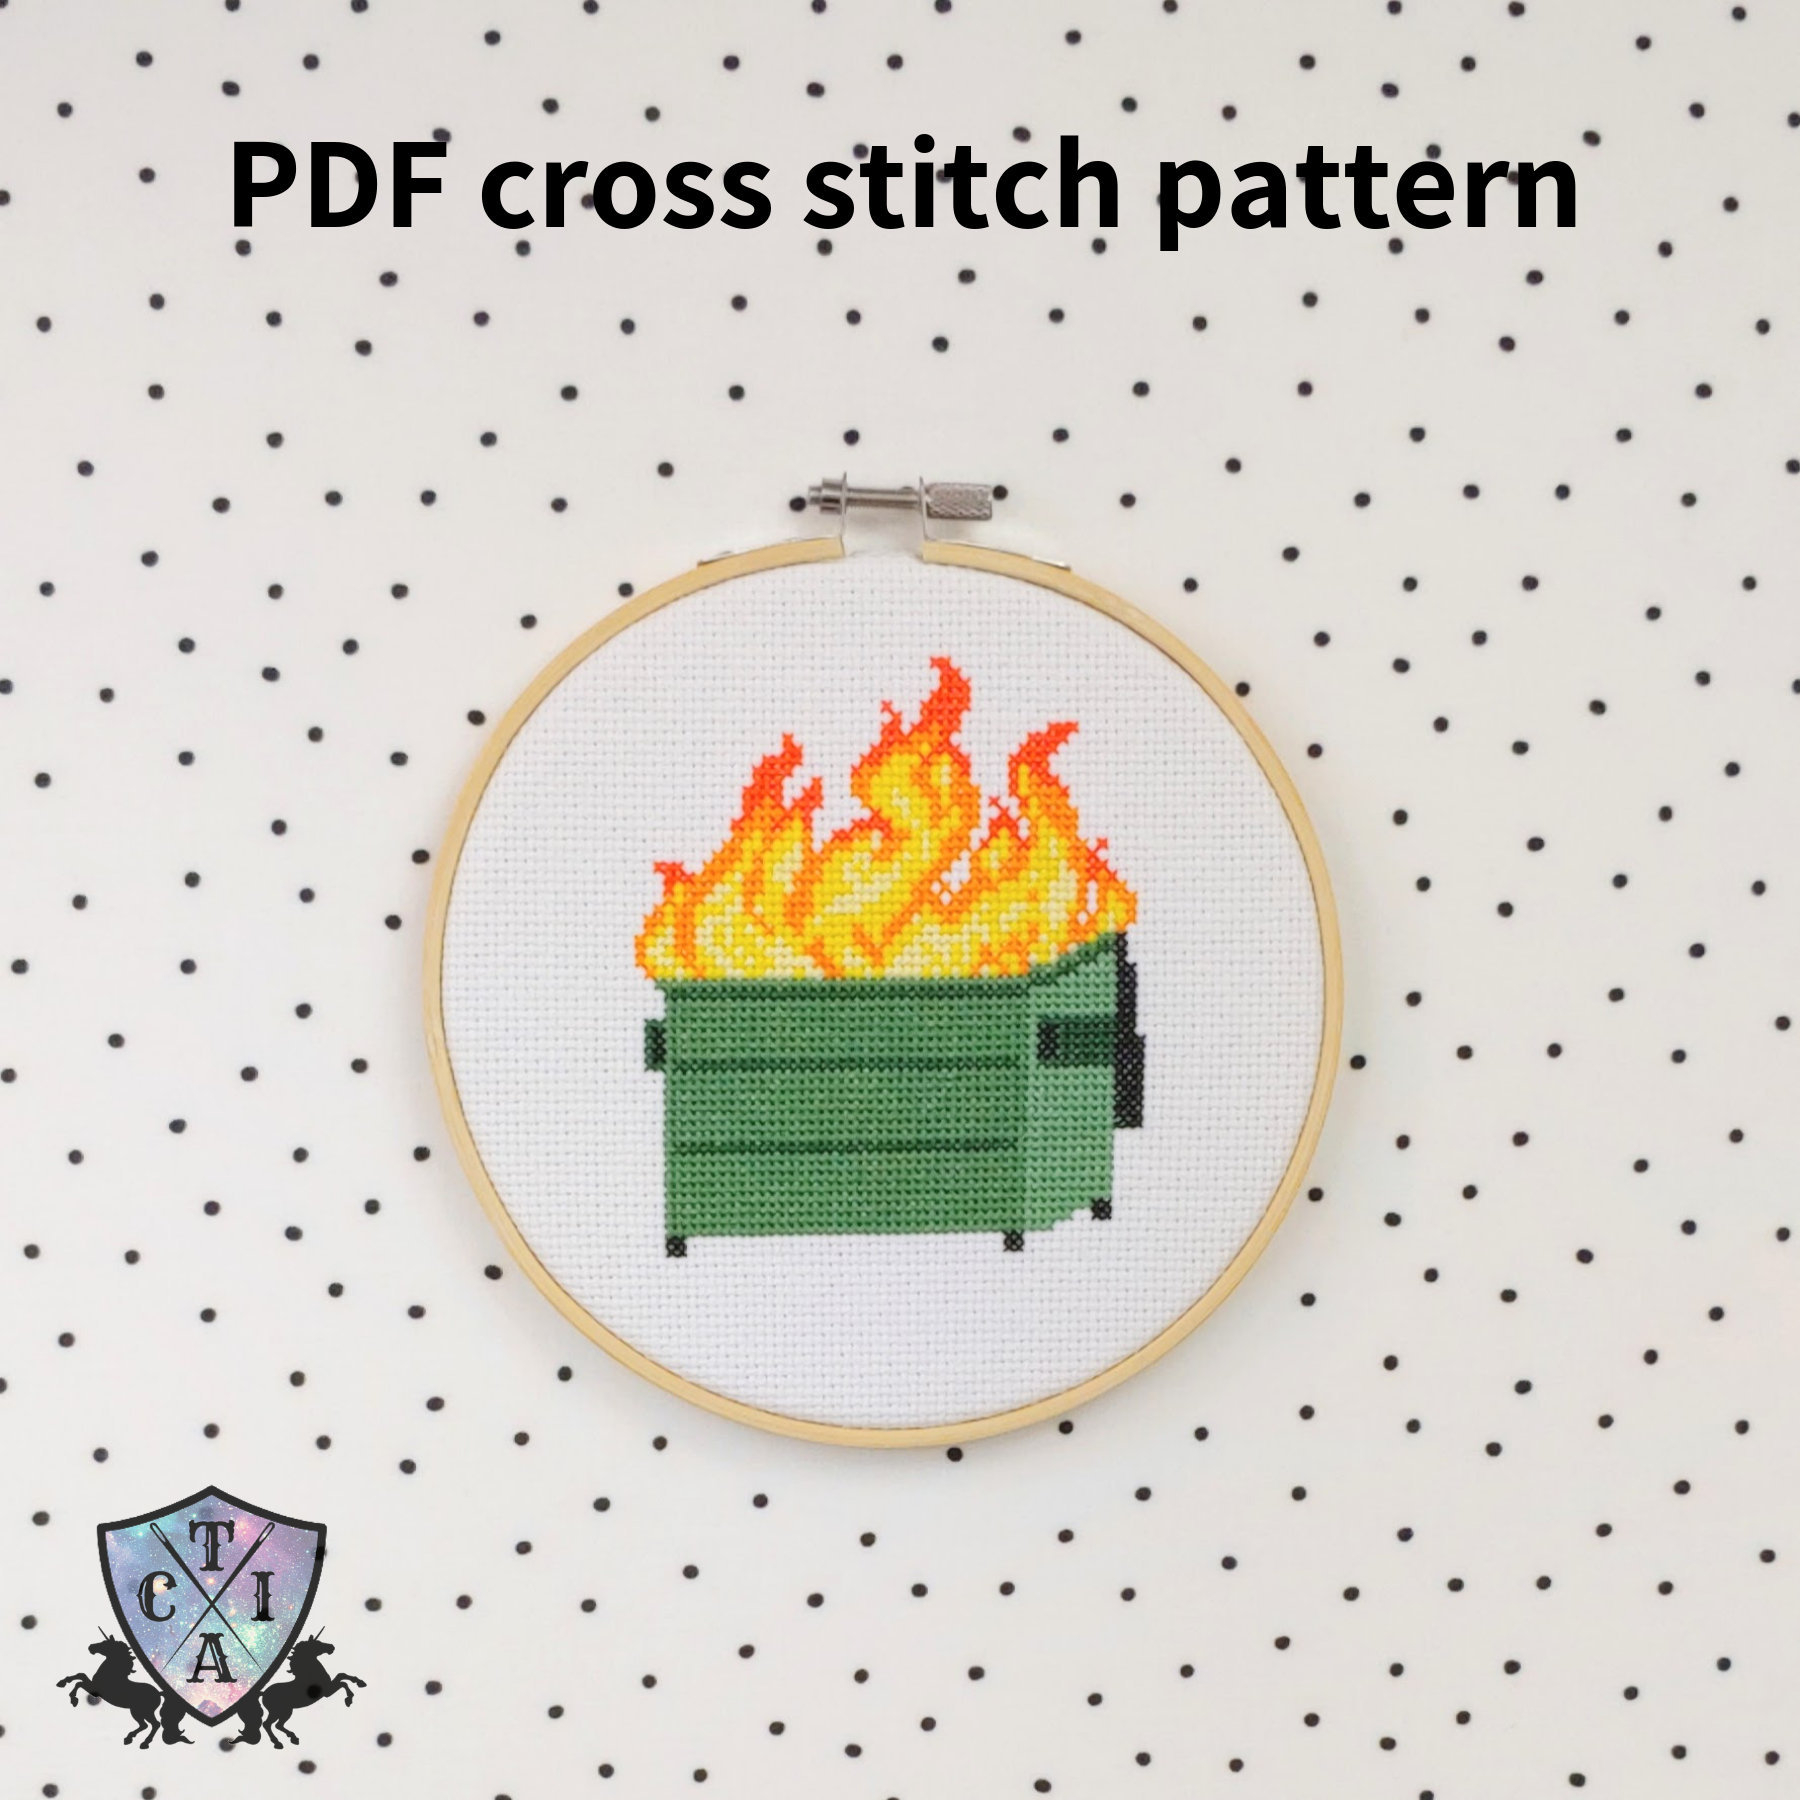 Embroidery Stitch Patterns Dumpster Fire Cross Stitch Pattern Subversive Embroidery Funny Needlepoint Meme Hoop Art Flaming Trash Garbage Pdf Instant Download